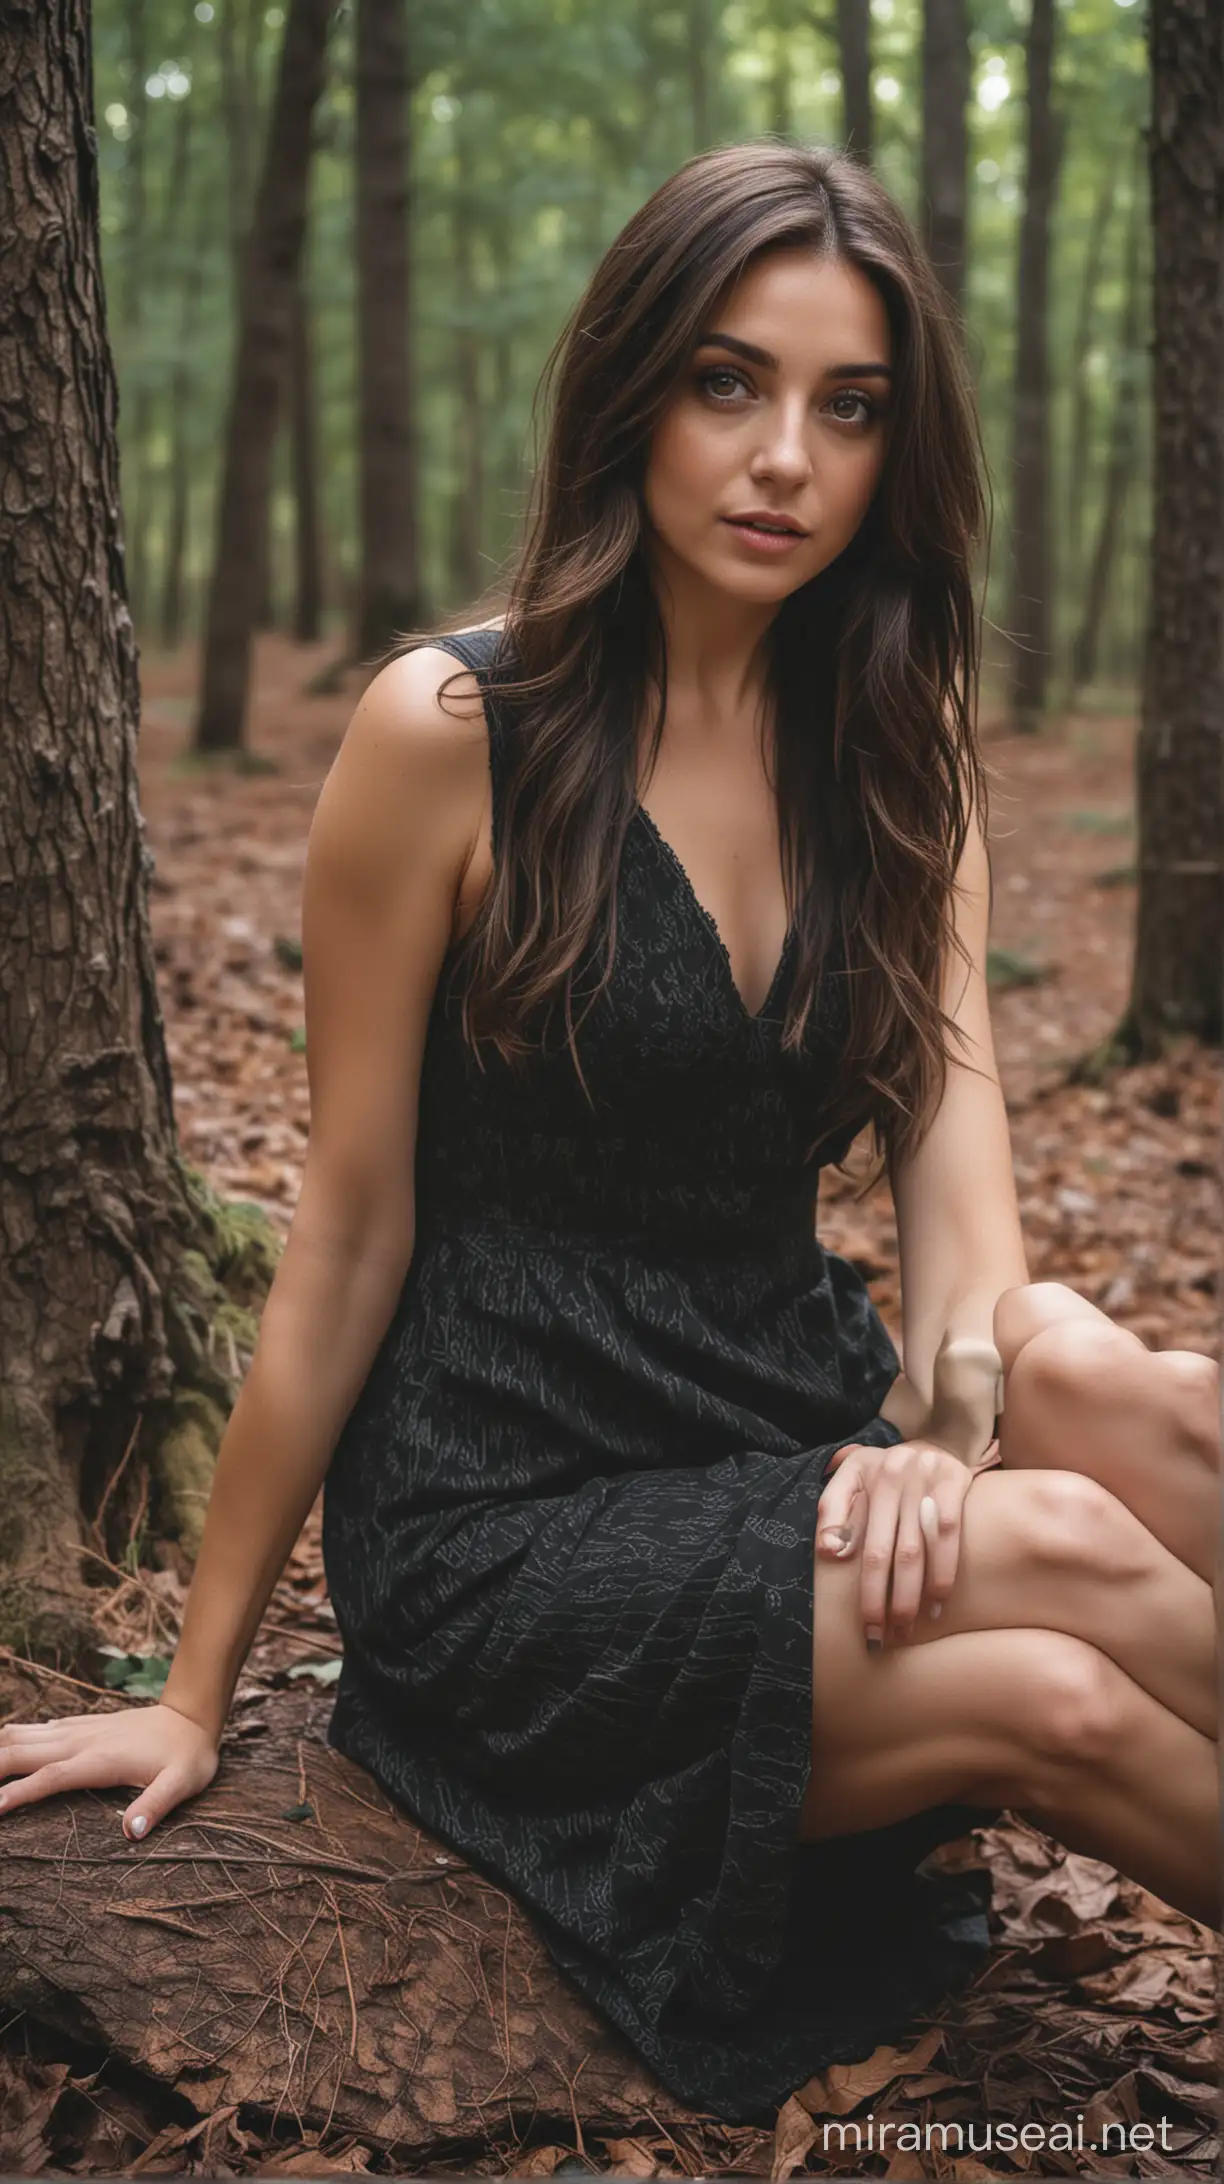 Enchanting Forest Scene Short Girl with Long Dark Hair Sitting Amidst Nature